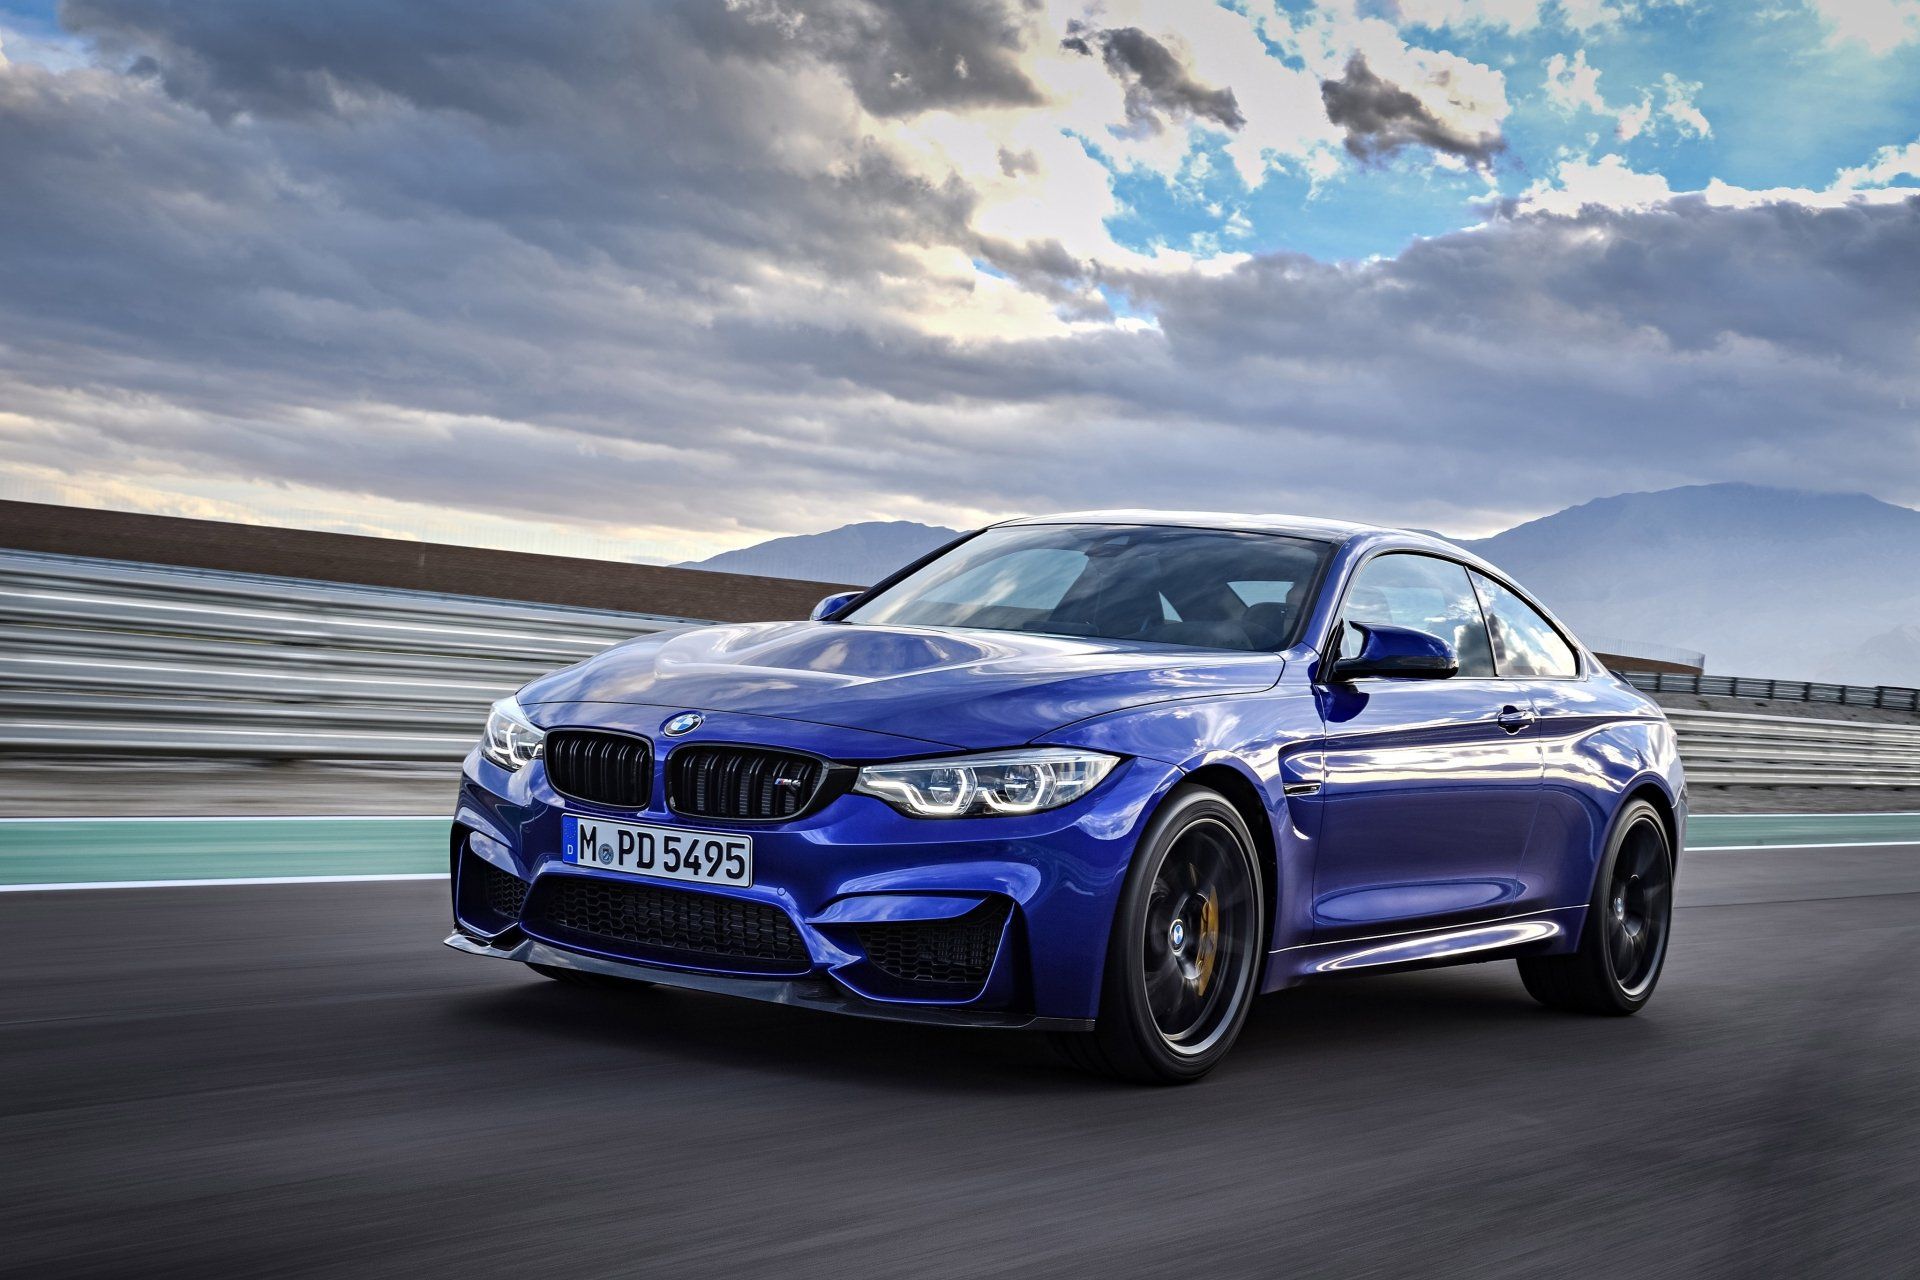 4K Ultra HD BMW M4 Wallpaper and Background Image